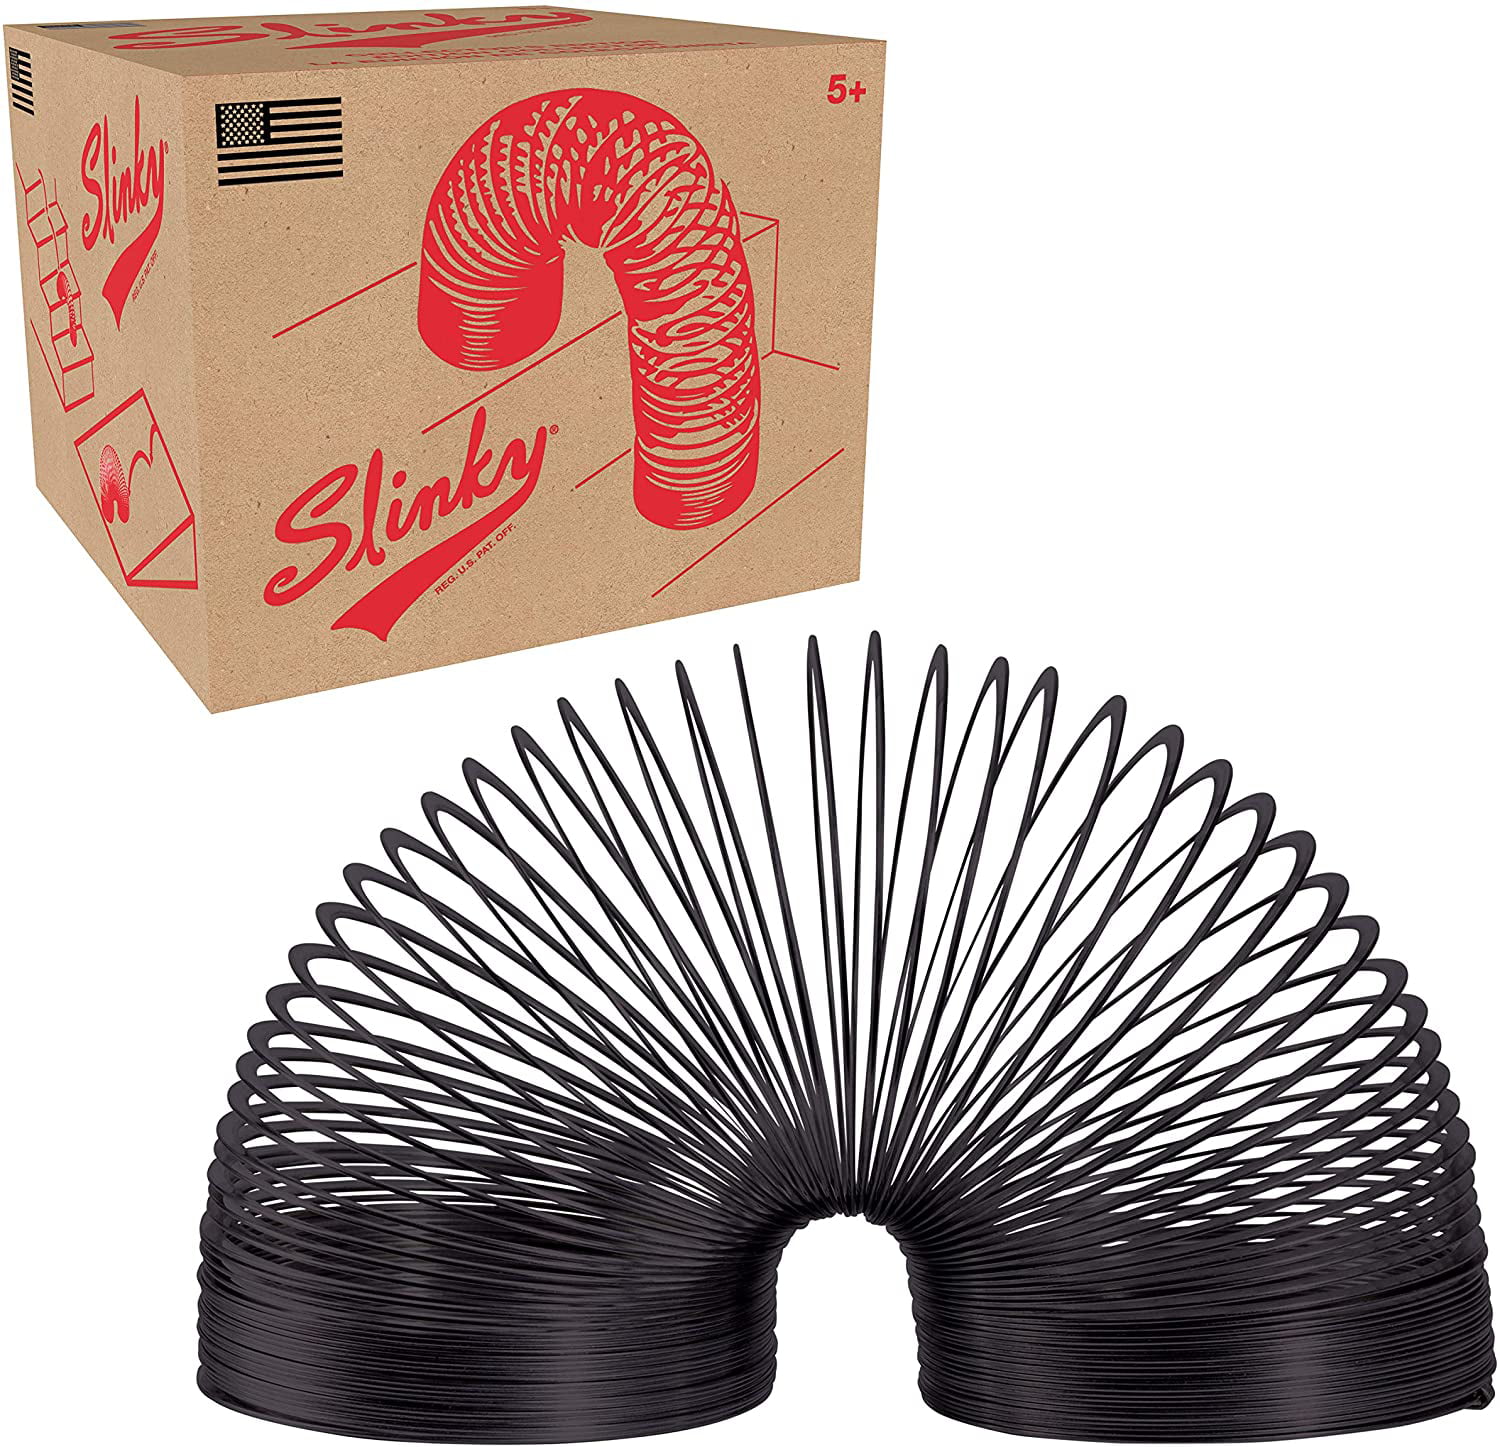 New Original Authentic Classic Slinky Open Box Fun Toy Kids Adults Gift 